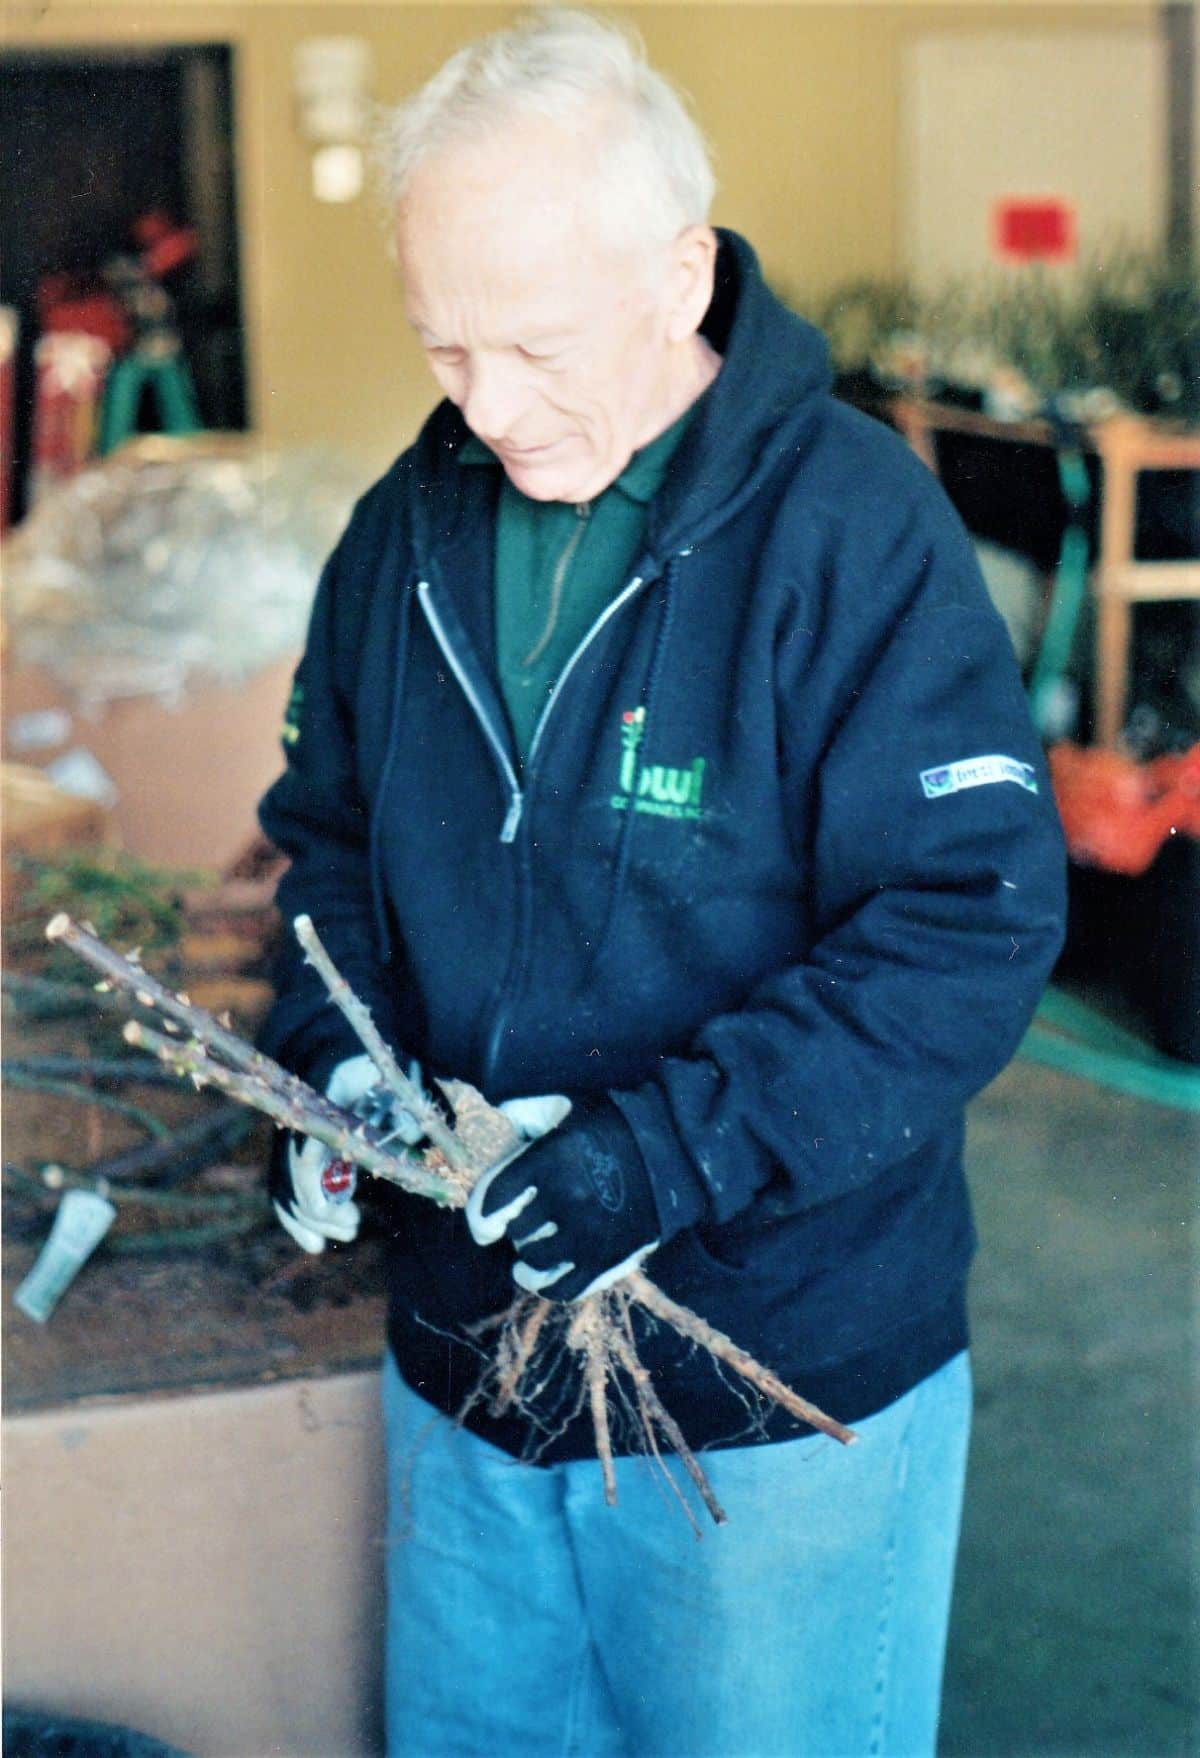 A Master rose gardener clips bare roots on a rose bush